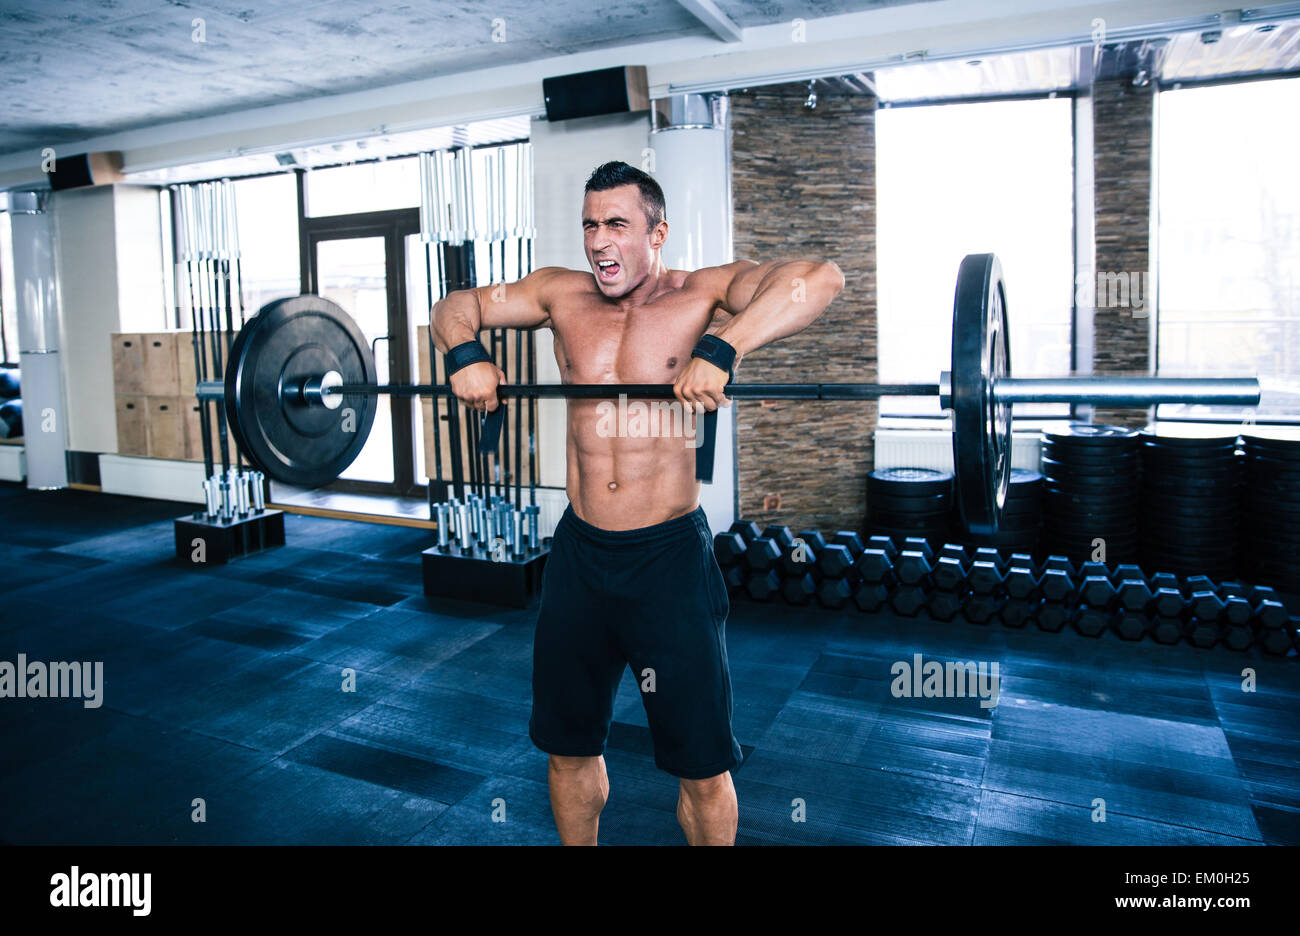 Monter man lifting barbell at gym Banque D'Images